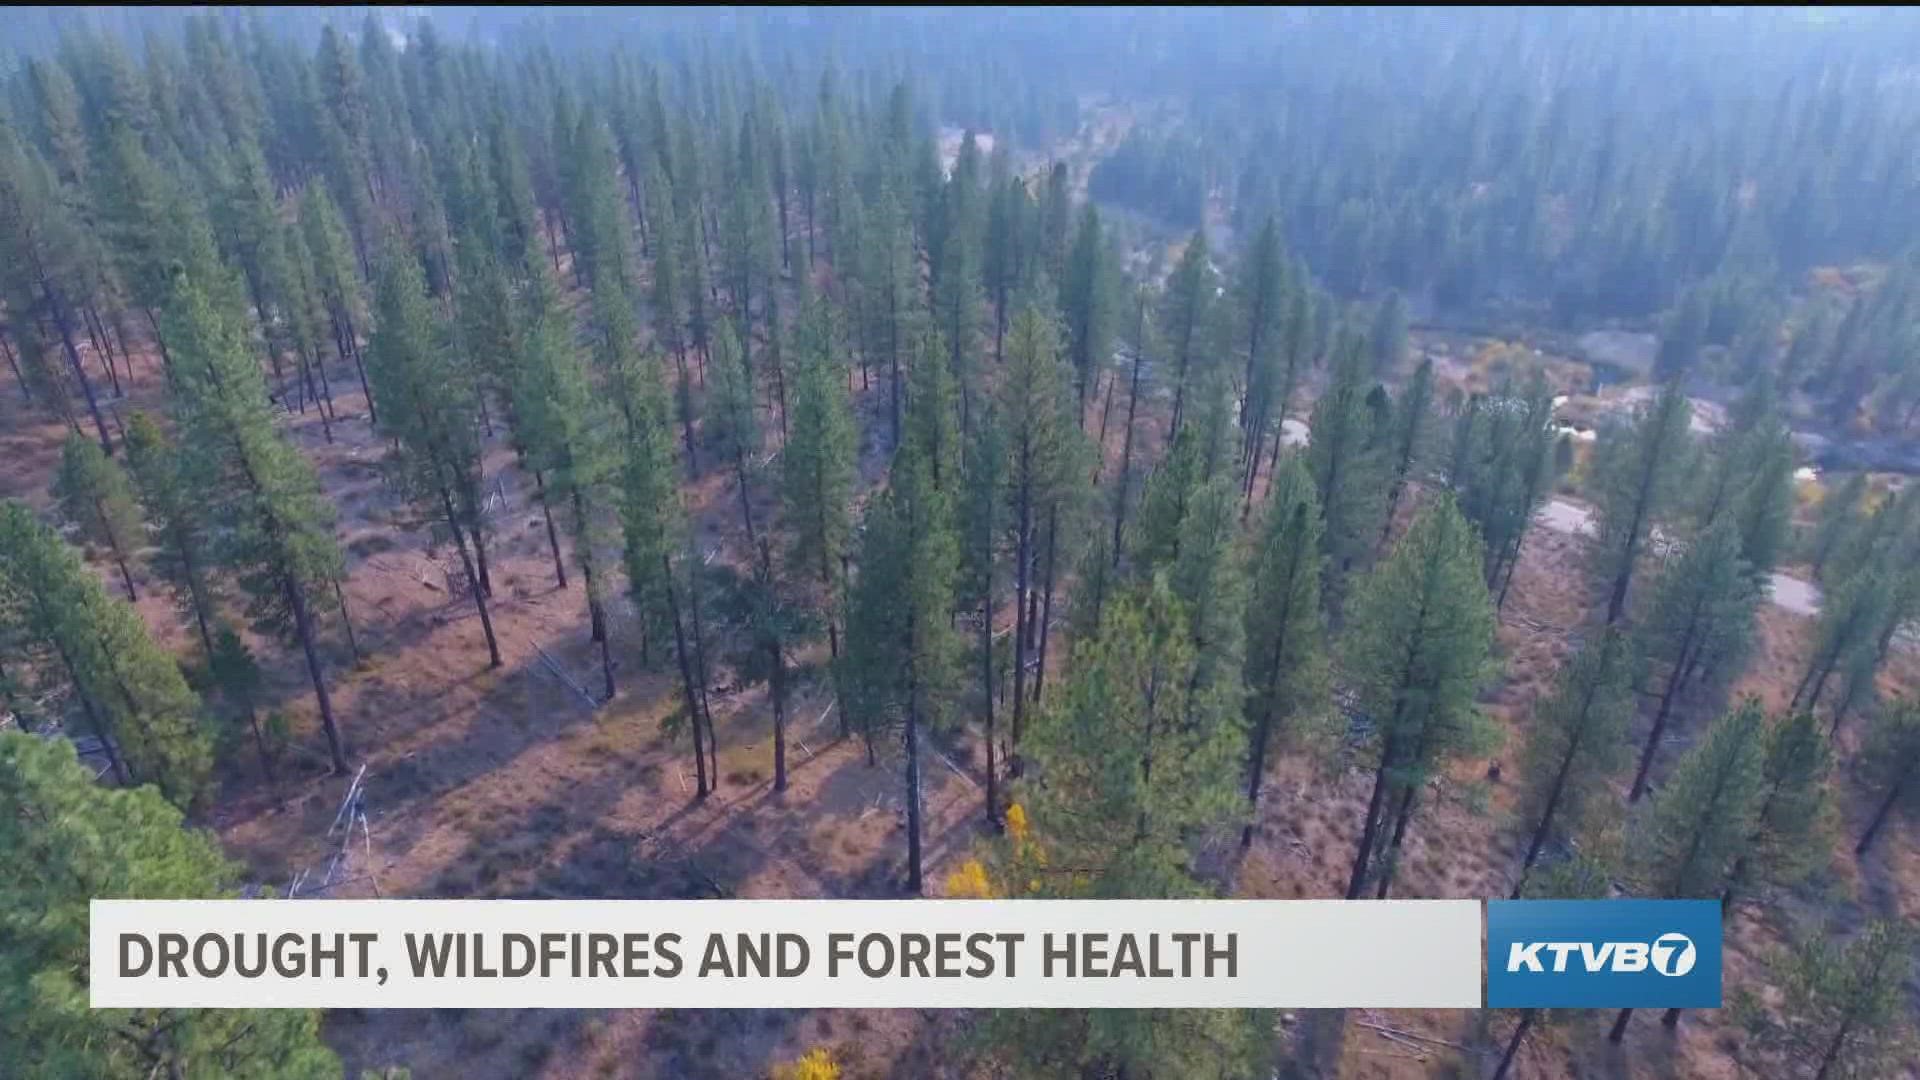 Foss said more than eight-million acres of Idaho's forestland are in declining condition, leaving them at high risk of insect problems, disease and wildfires.